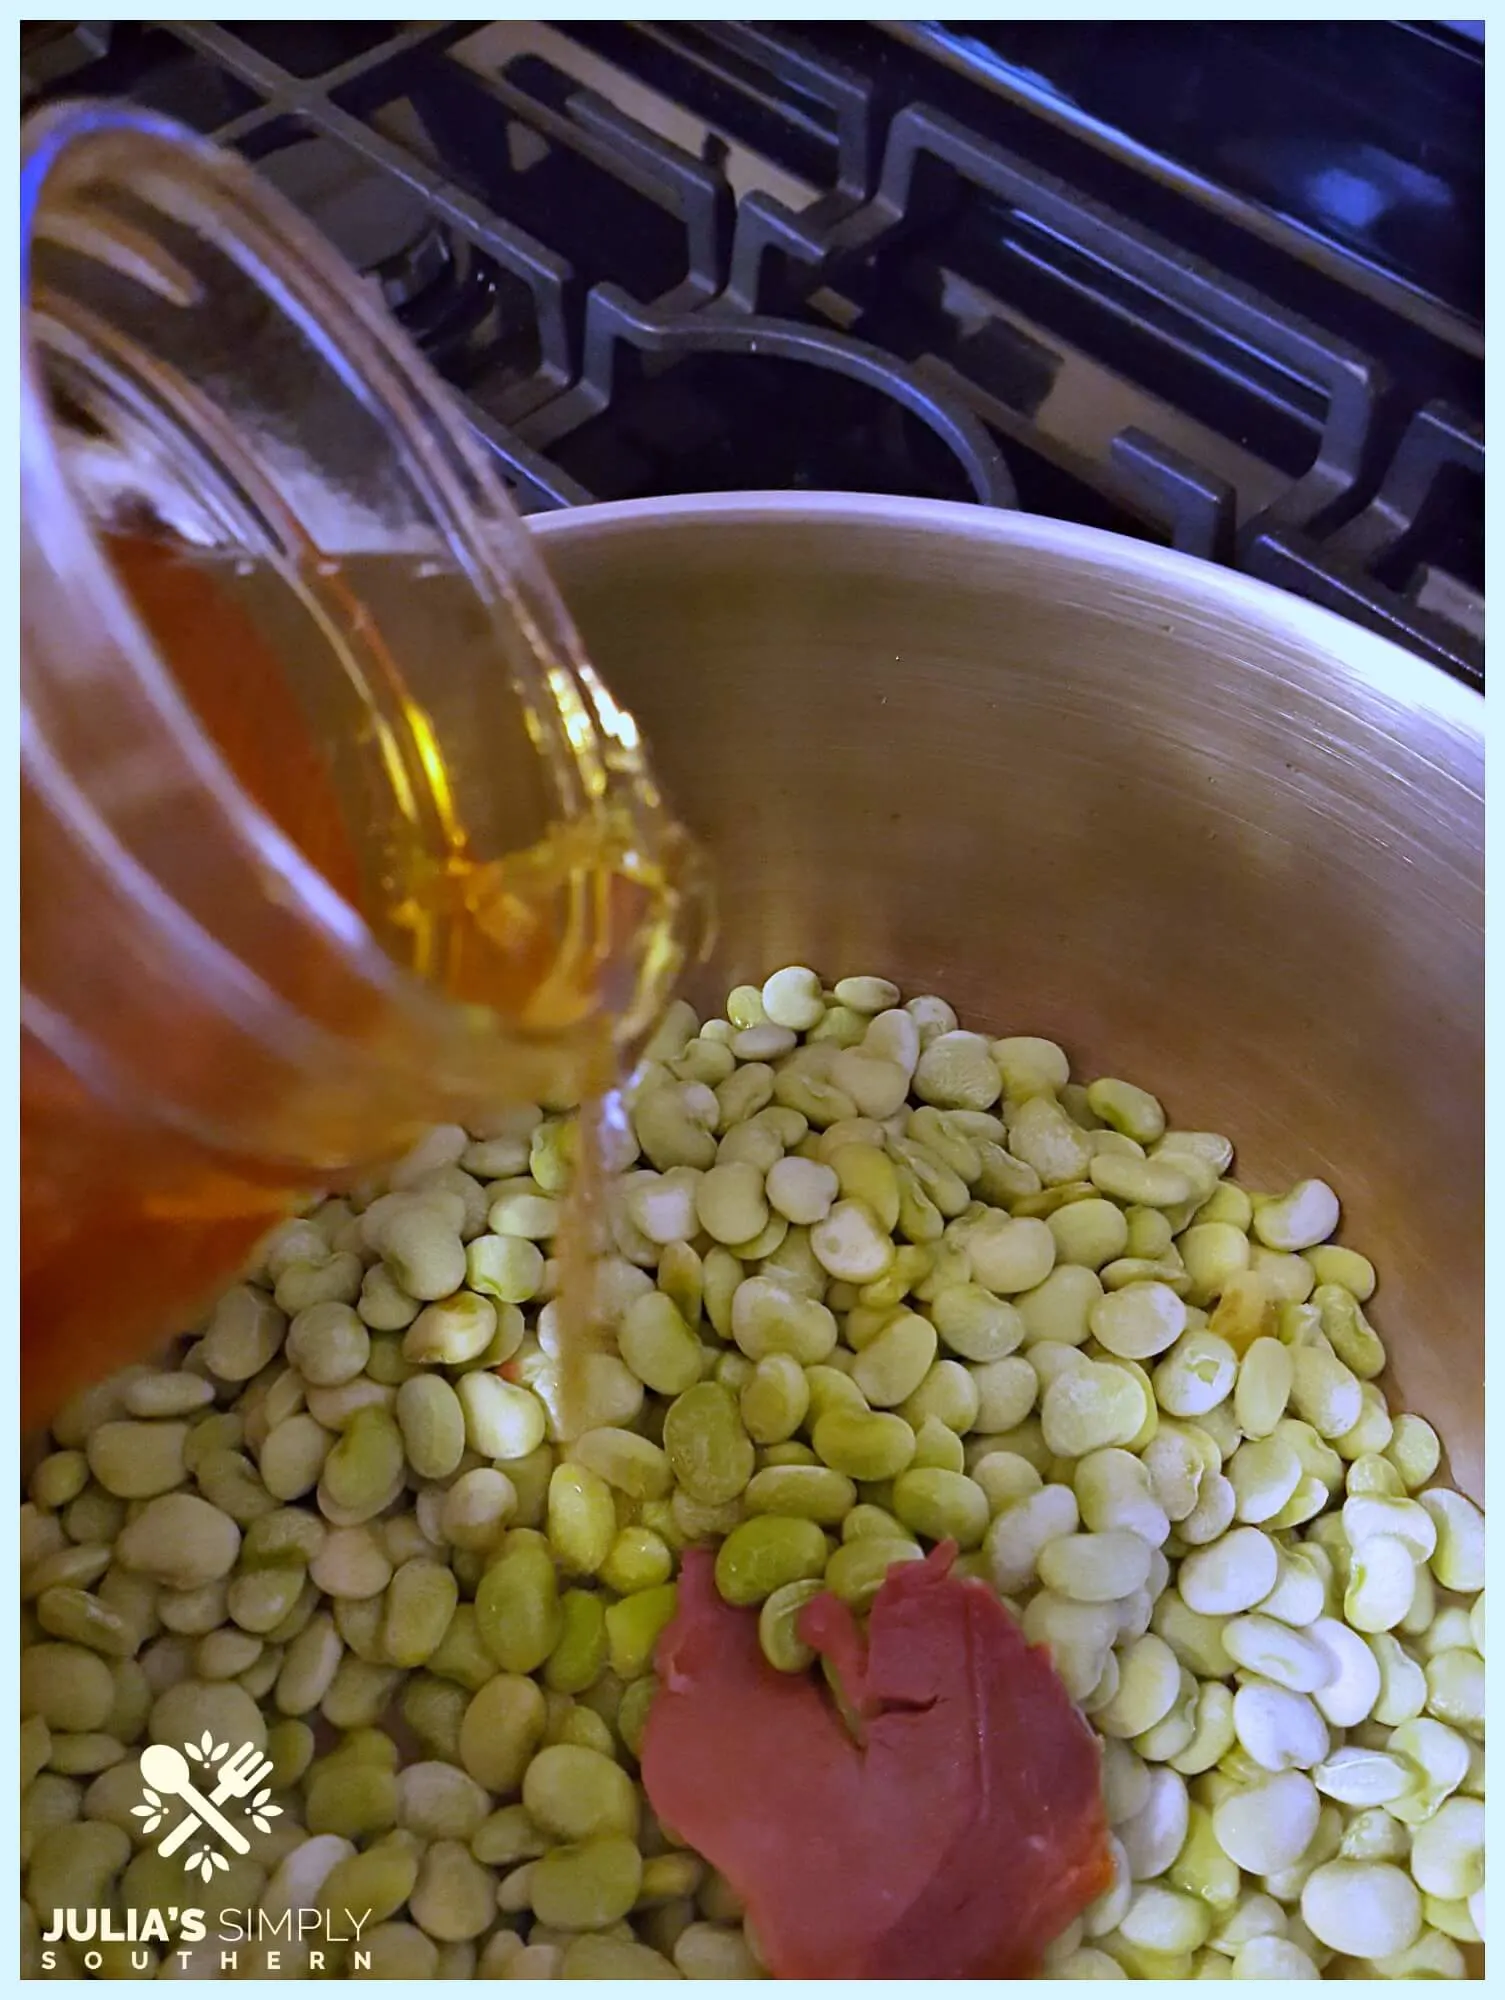 How to cook flavorful beans 